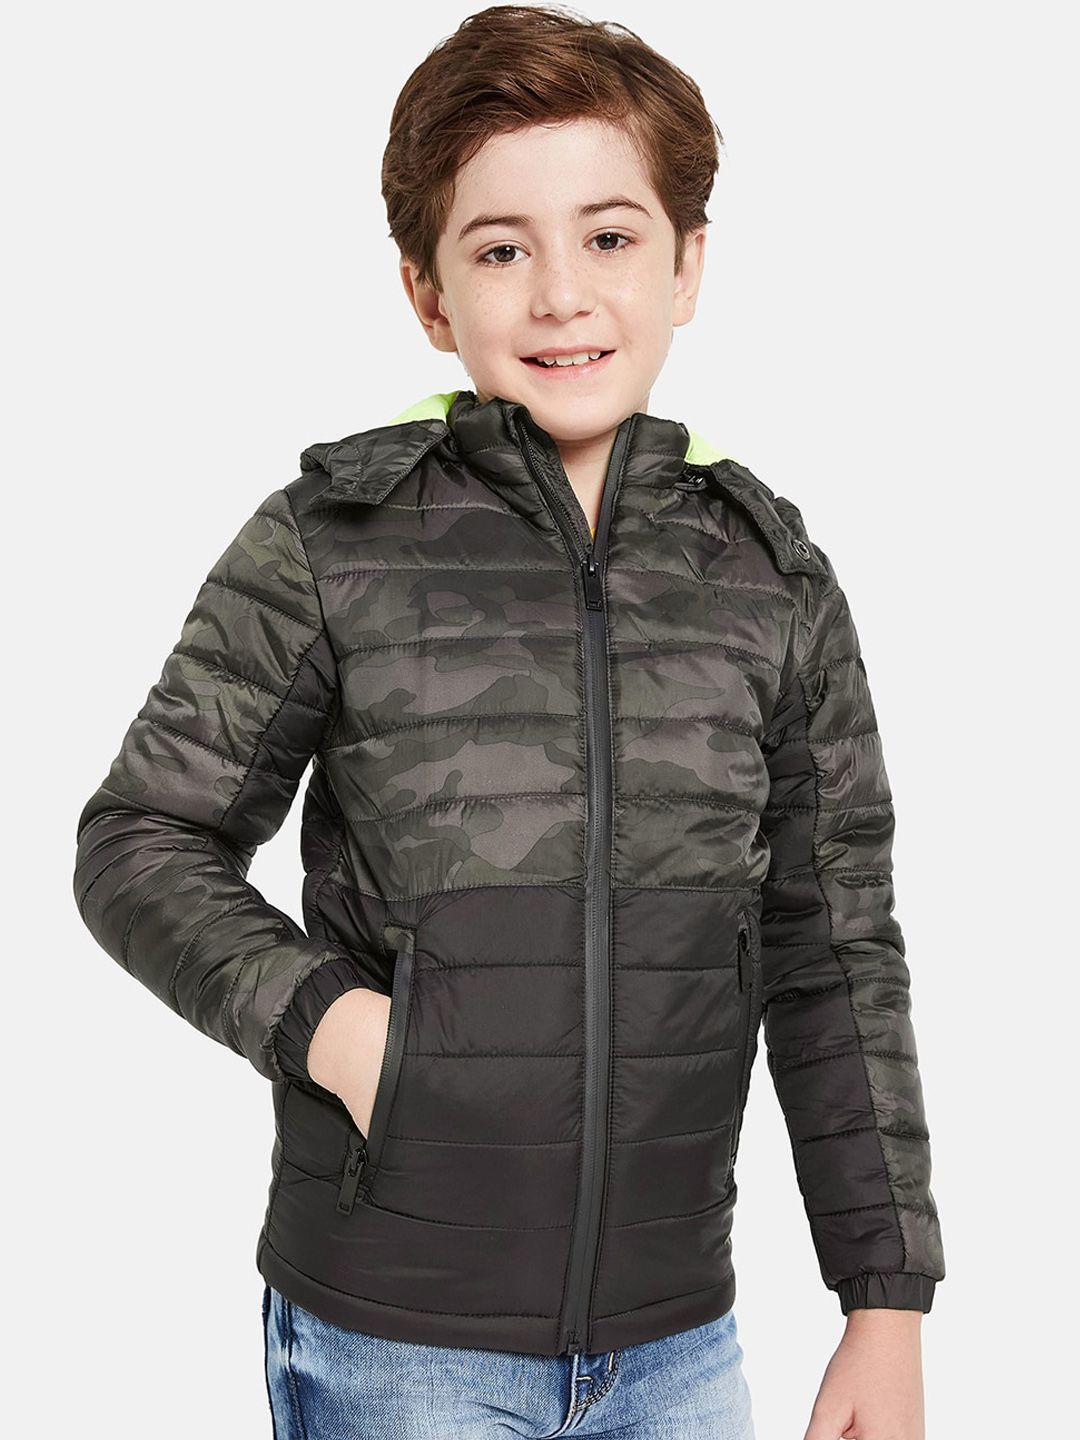 octave boys camouflage hooded puffer jacket